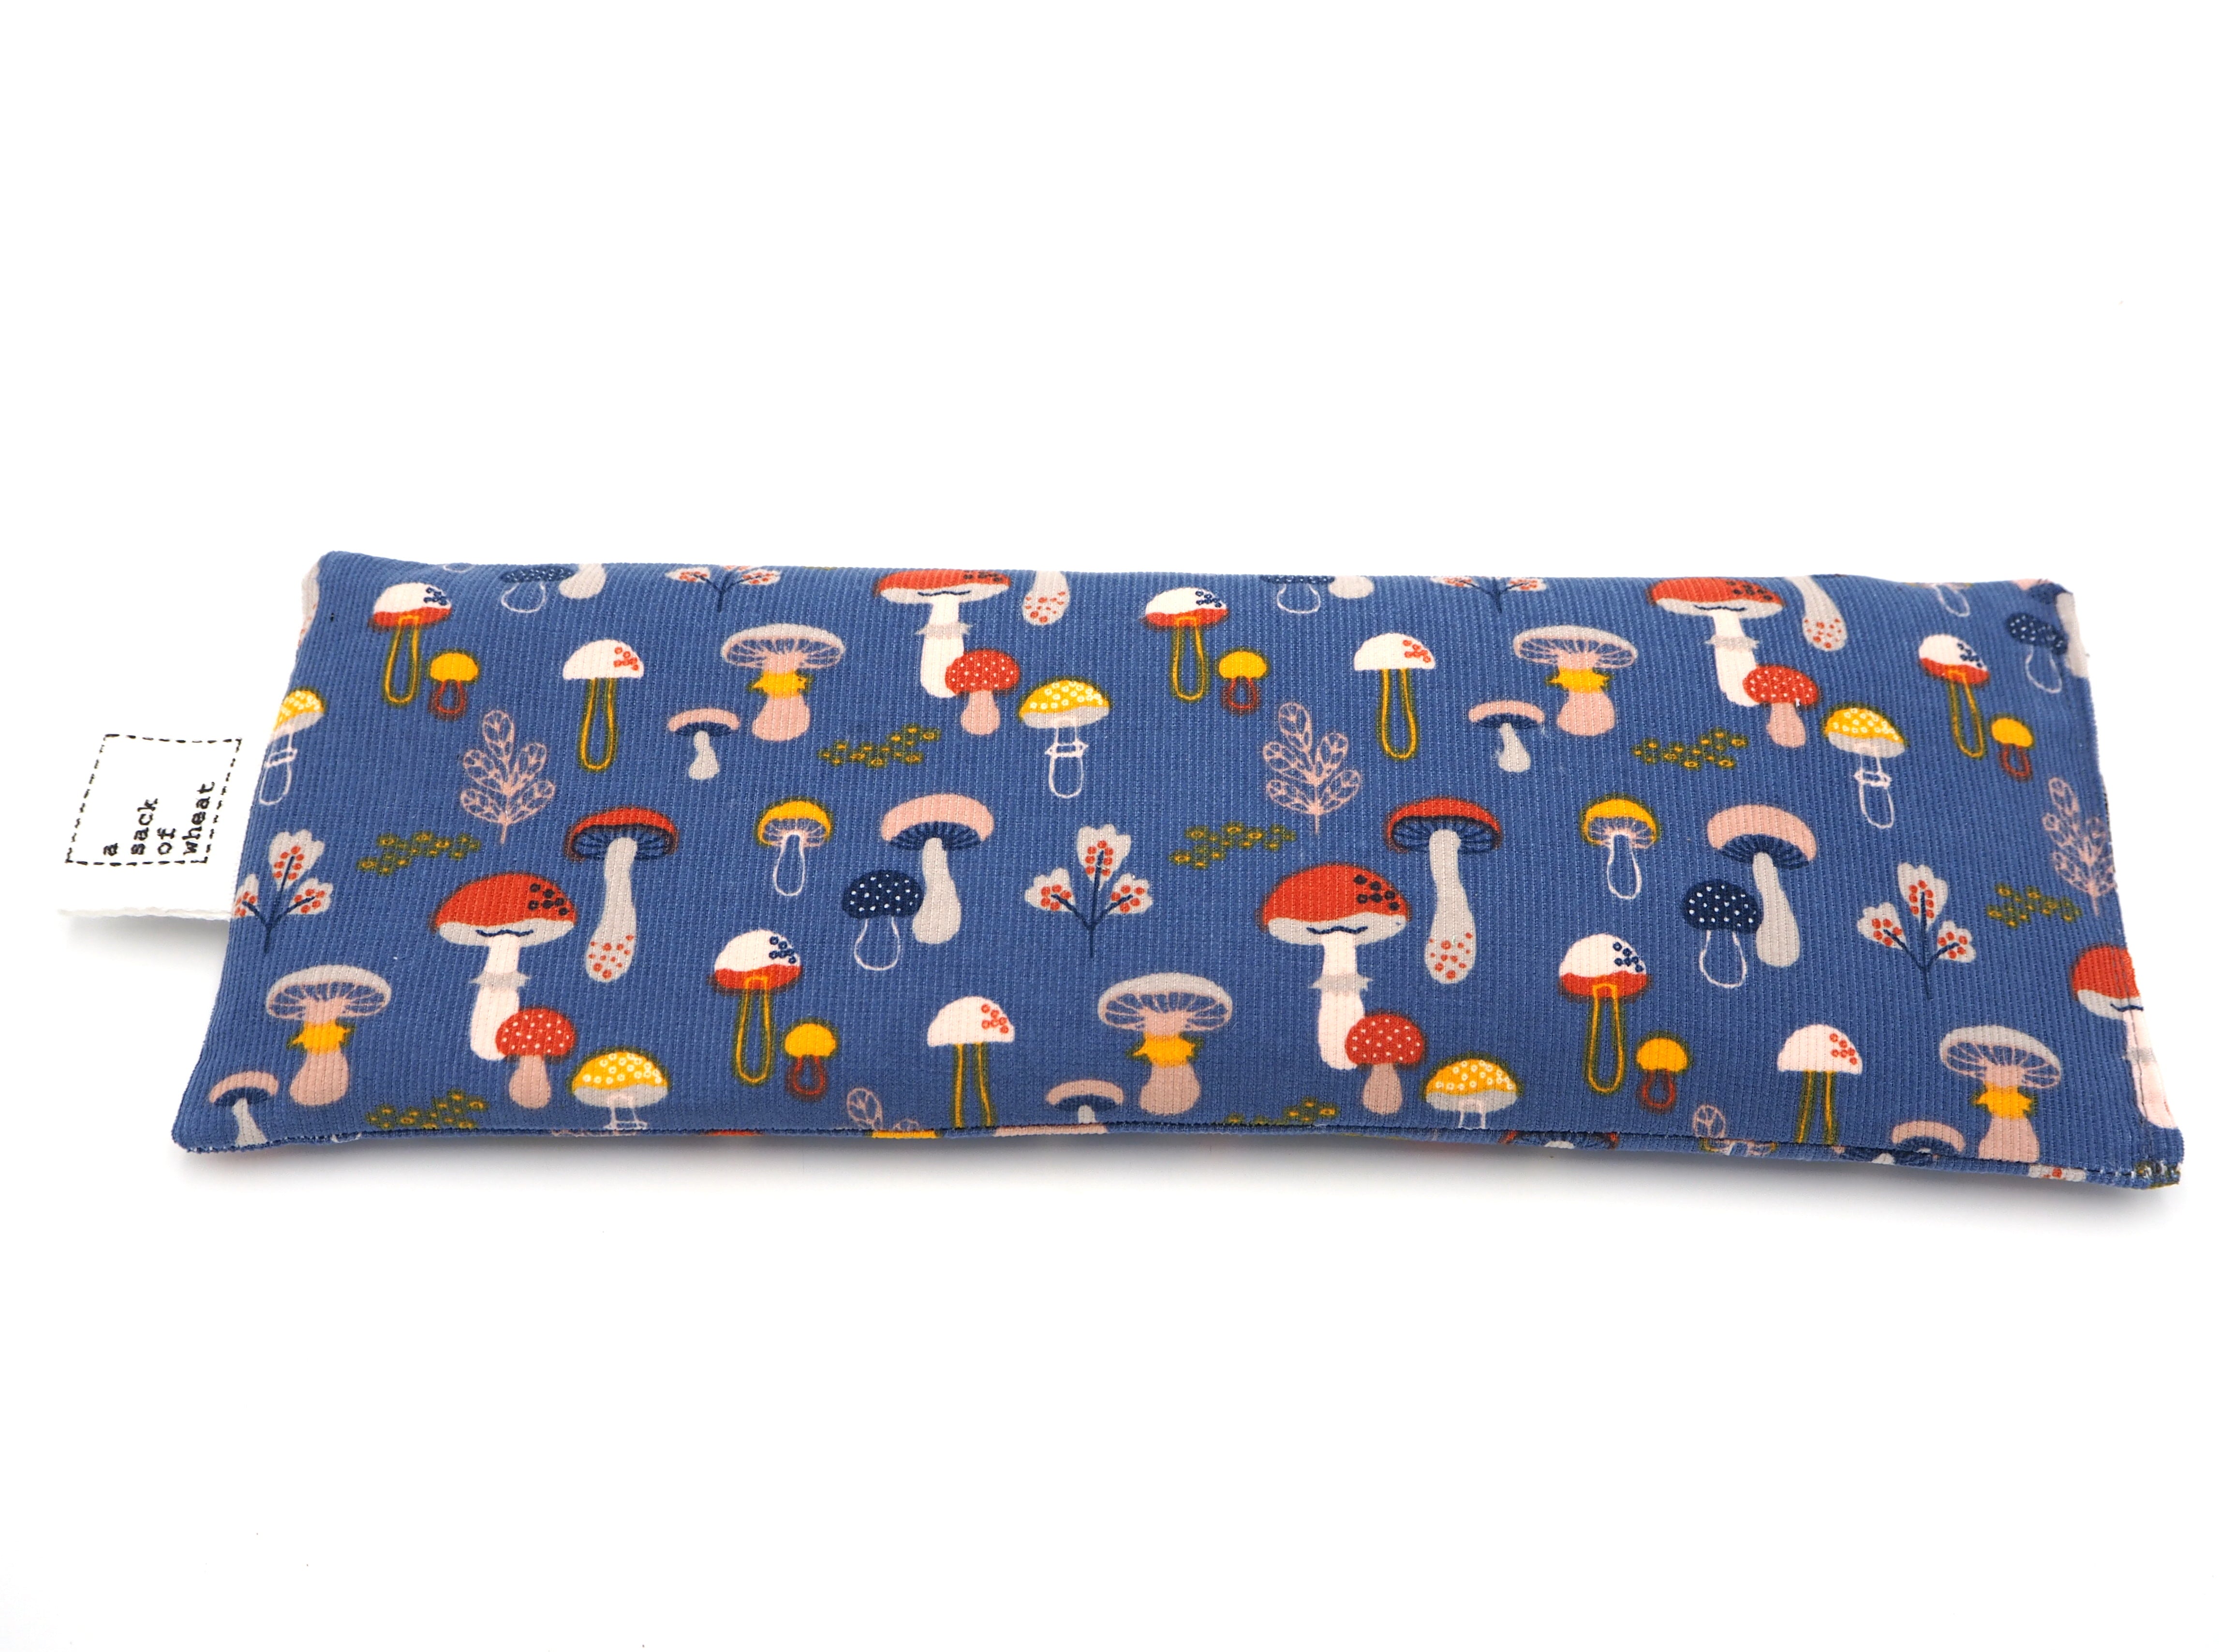 Flat view of A Sack Of Wheat, featuring cute, colorful mushrooms on blue corduroy 100% cotton fabric